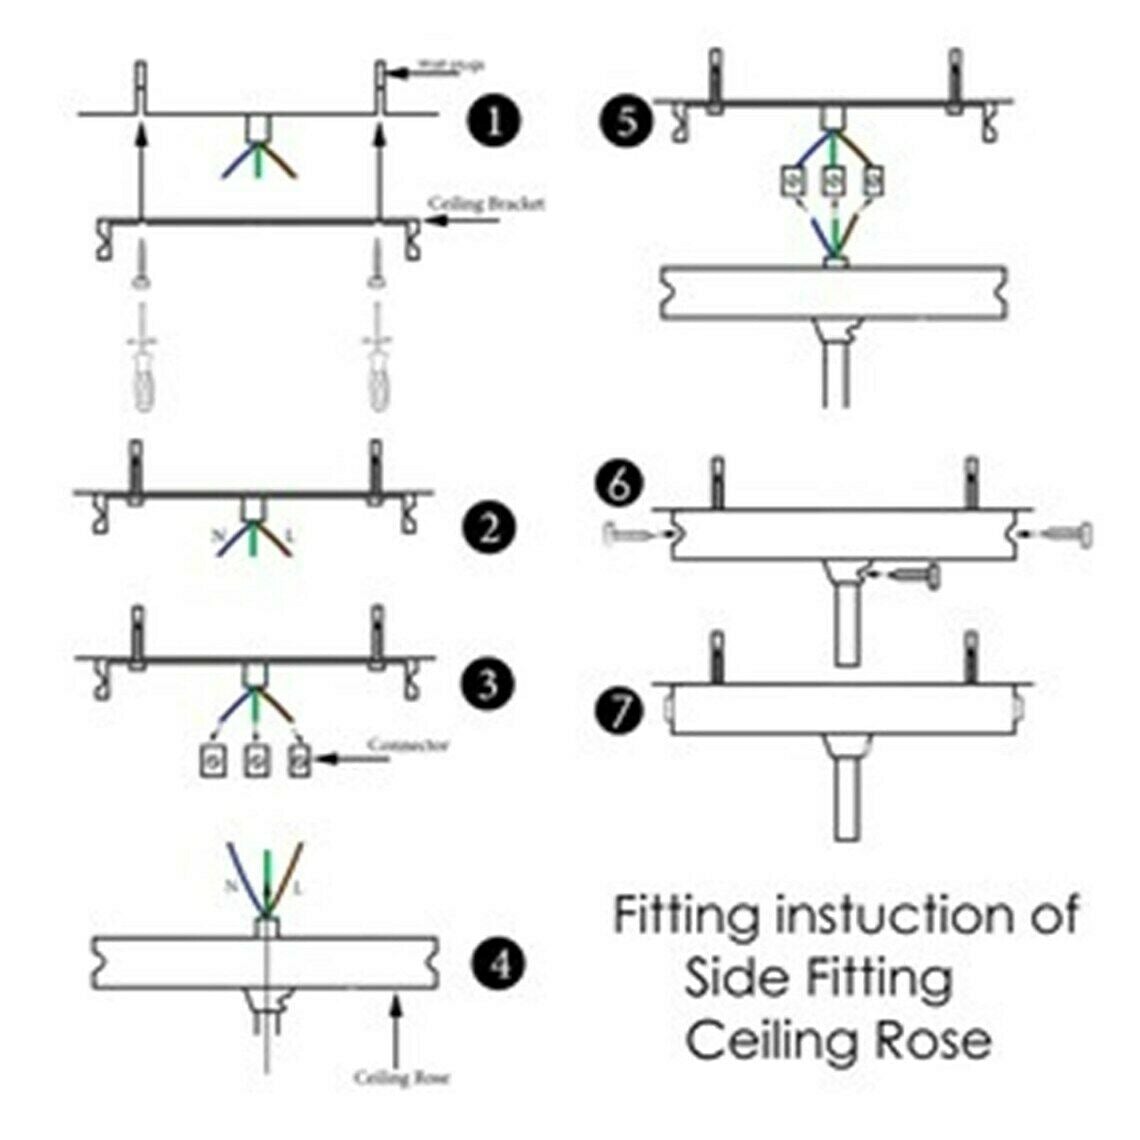 Copper Industrial Lighting - ceiling rose fitting instruction